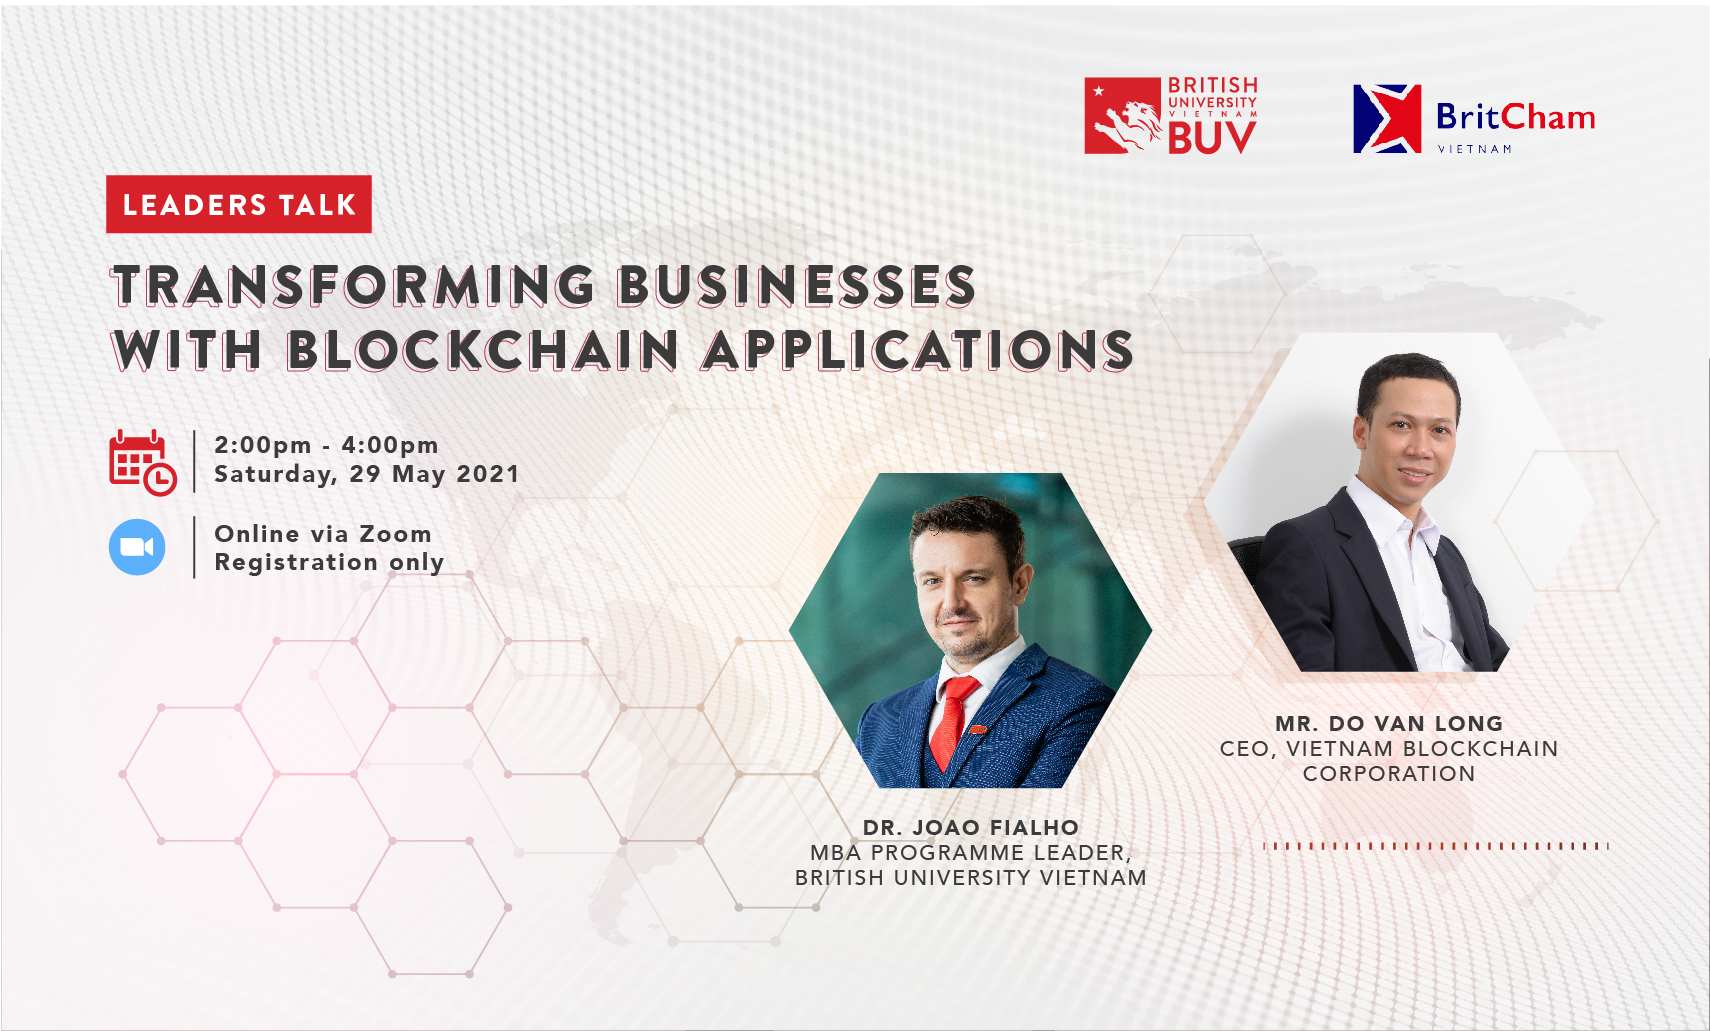 Leaders Talk “Transforming Businesses with Blockchain Applications” in order to help businesses stay ahead of the market